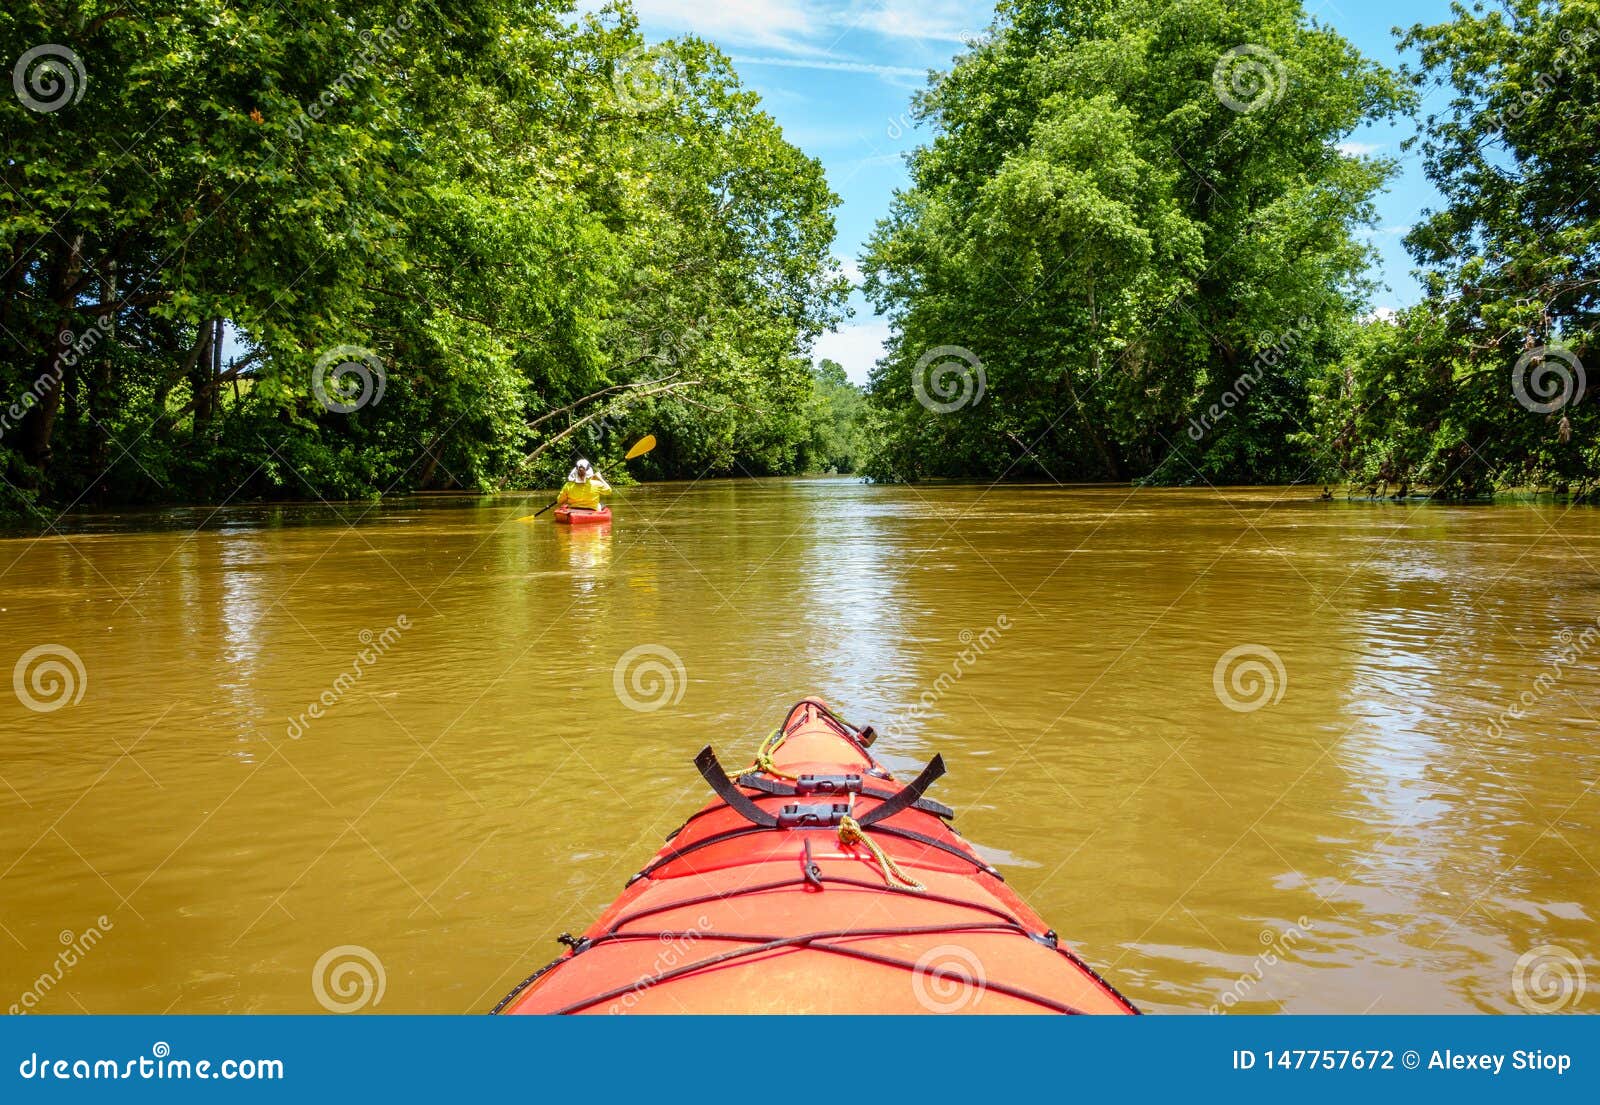 kayaking on a creek in central kentucky